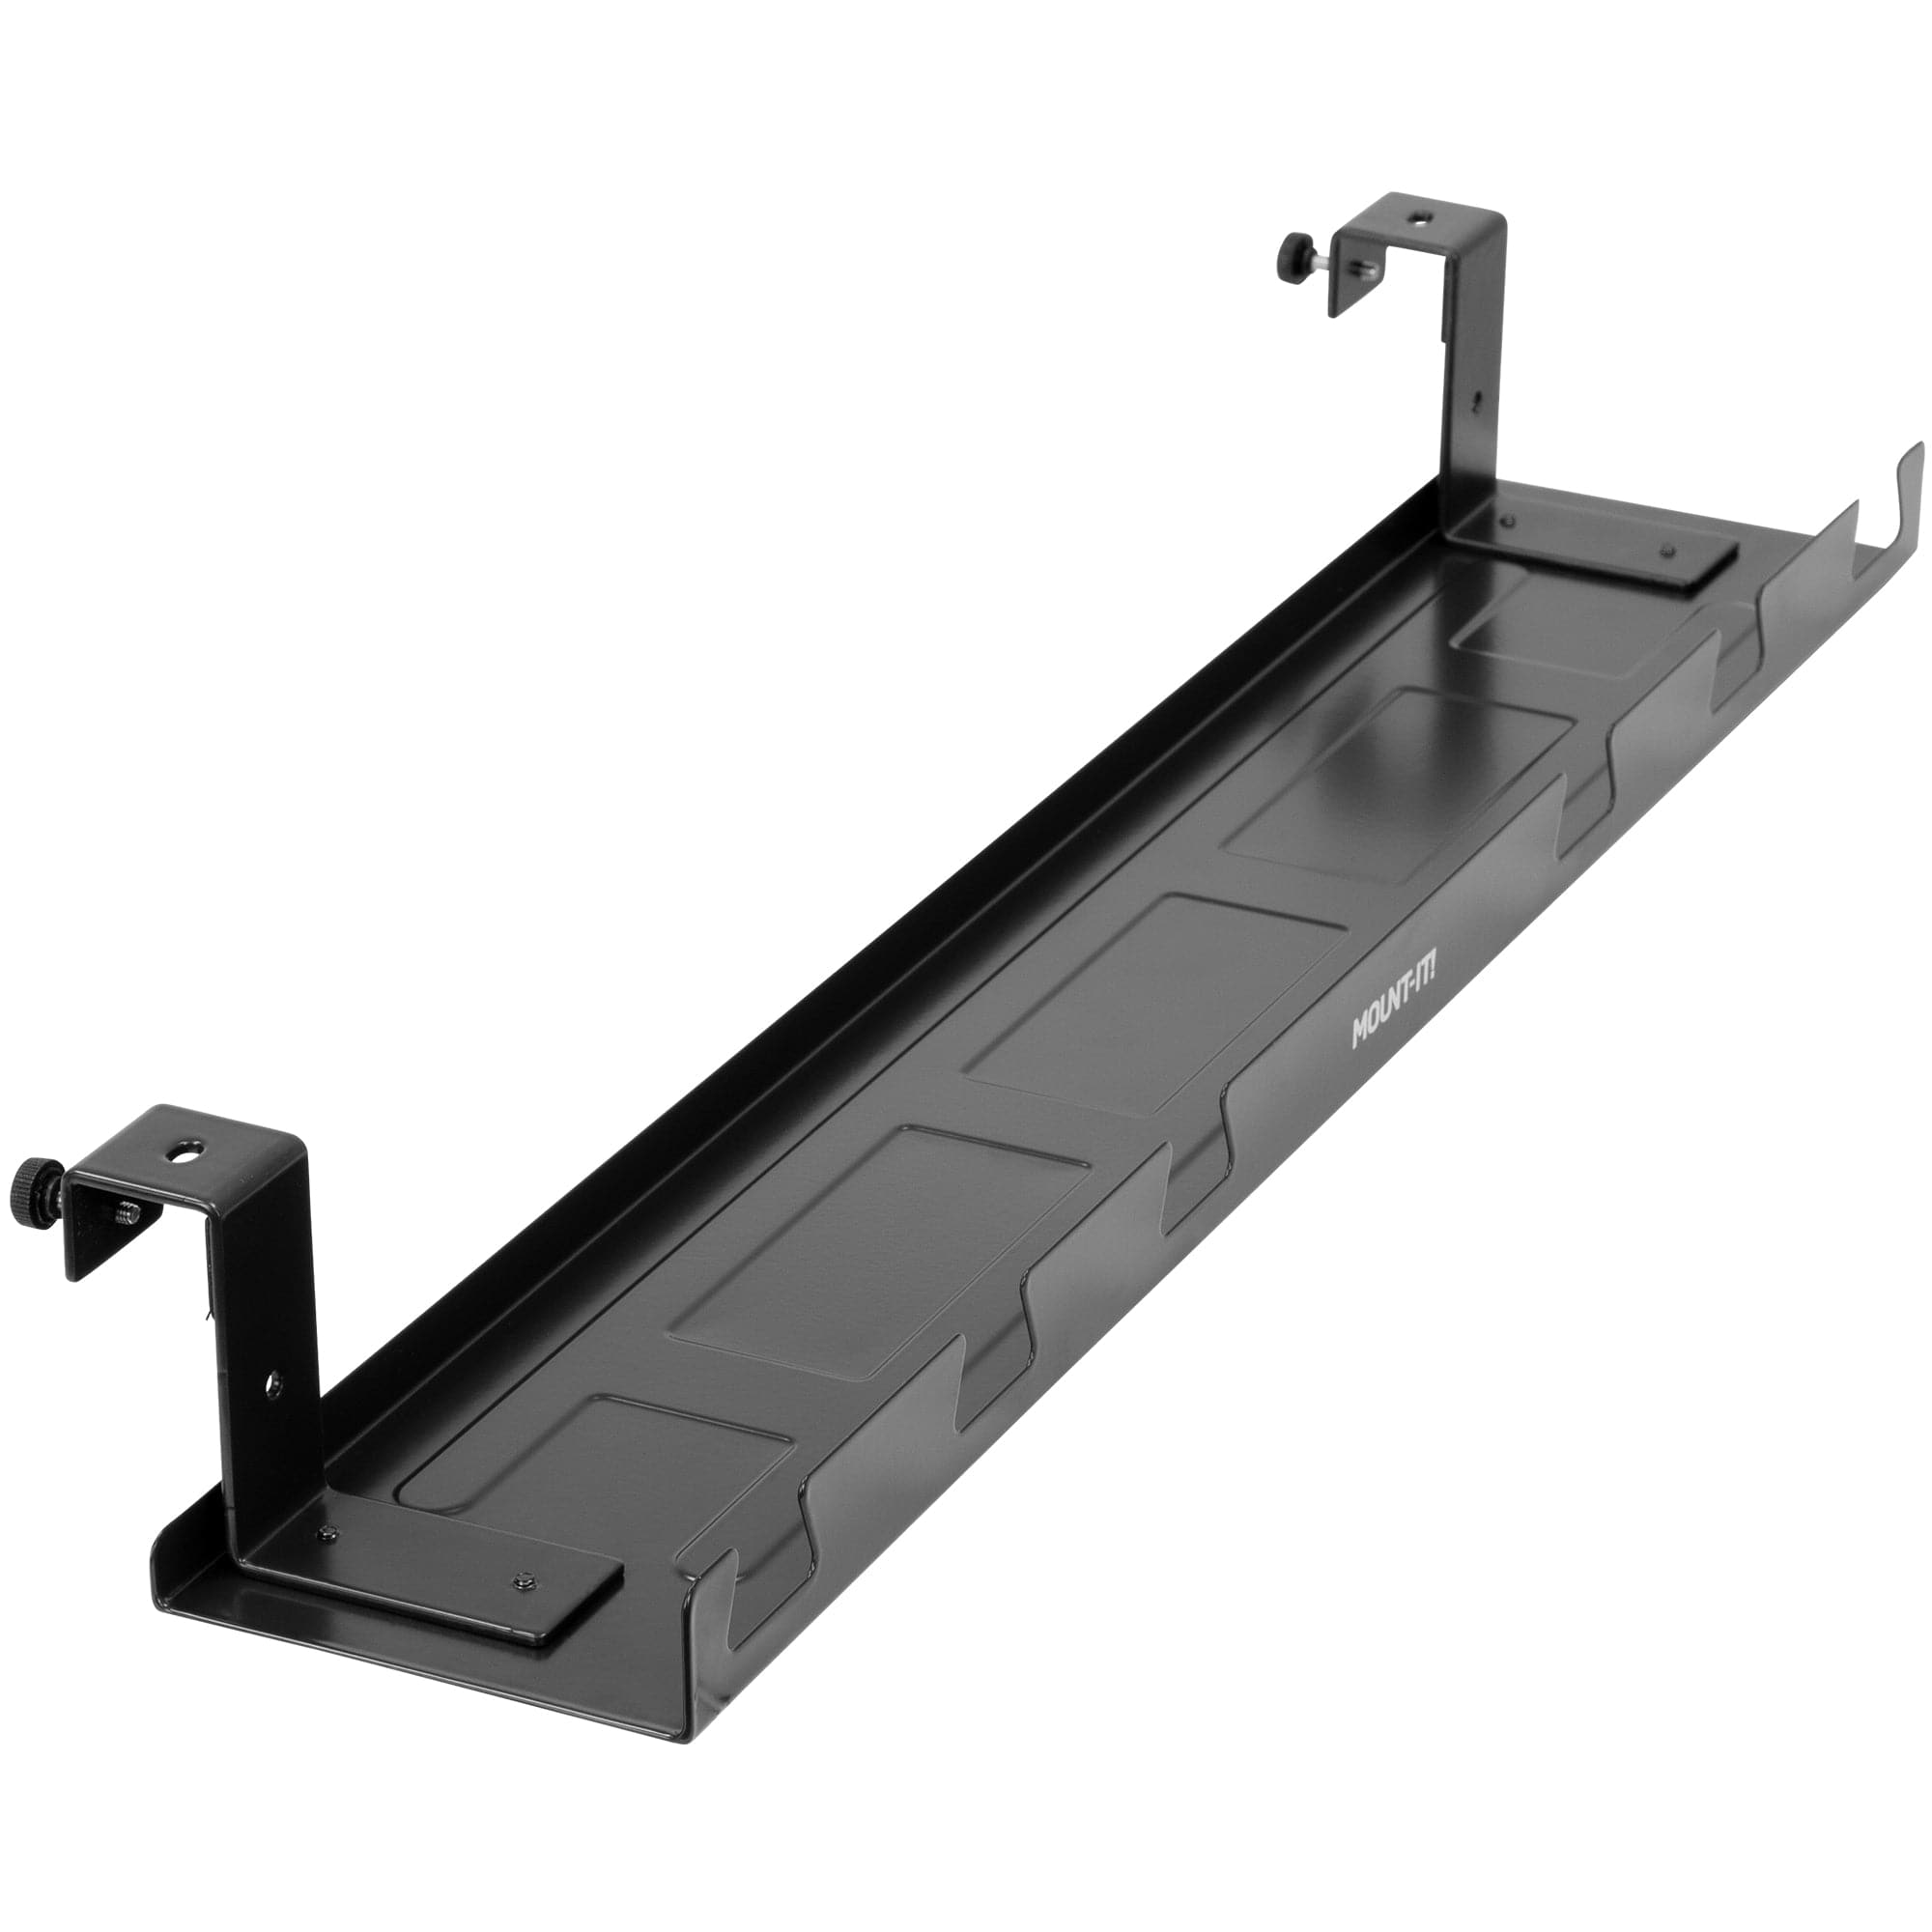 https://cdn.shopify.com/s/files/1/0051/3674/4566/products/under-desk-cable-tray-476237.jpg?v=1687295665